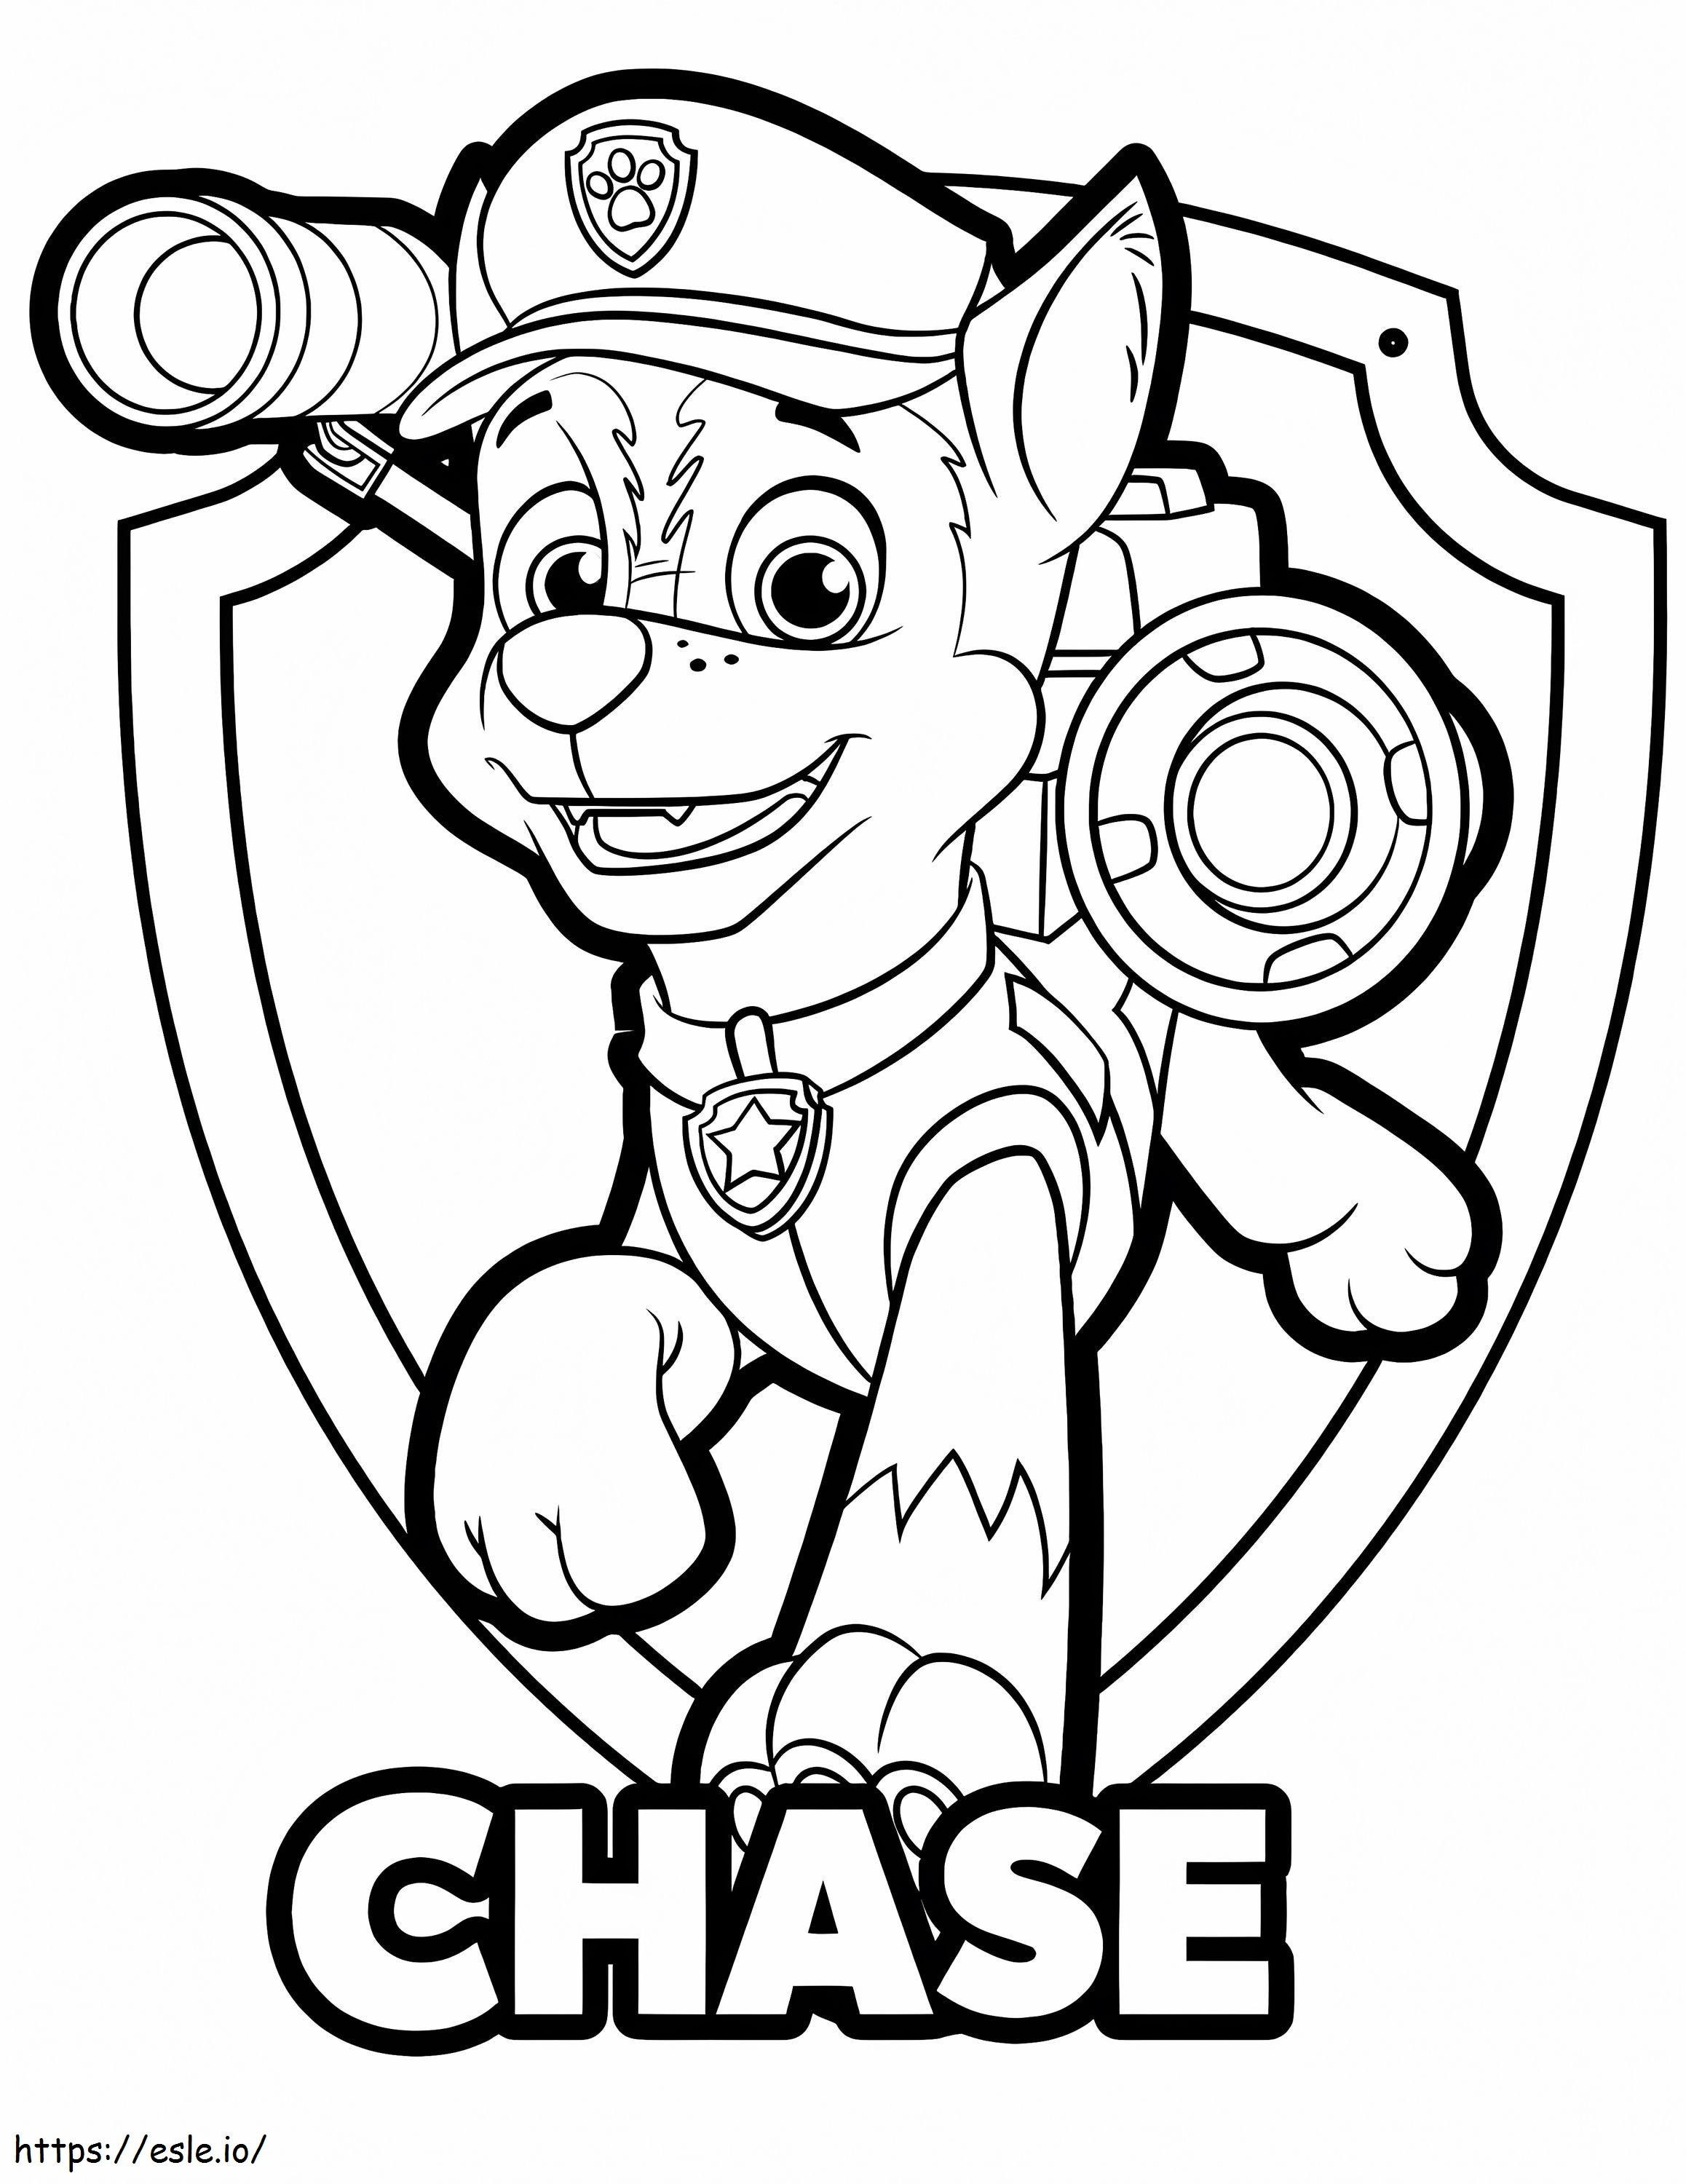 Chase Paw Patrol coloring page